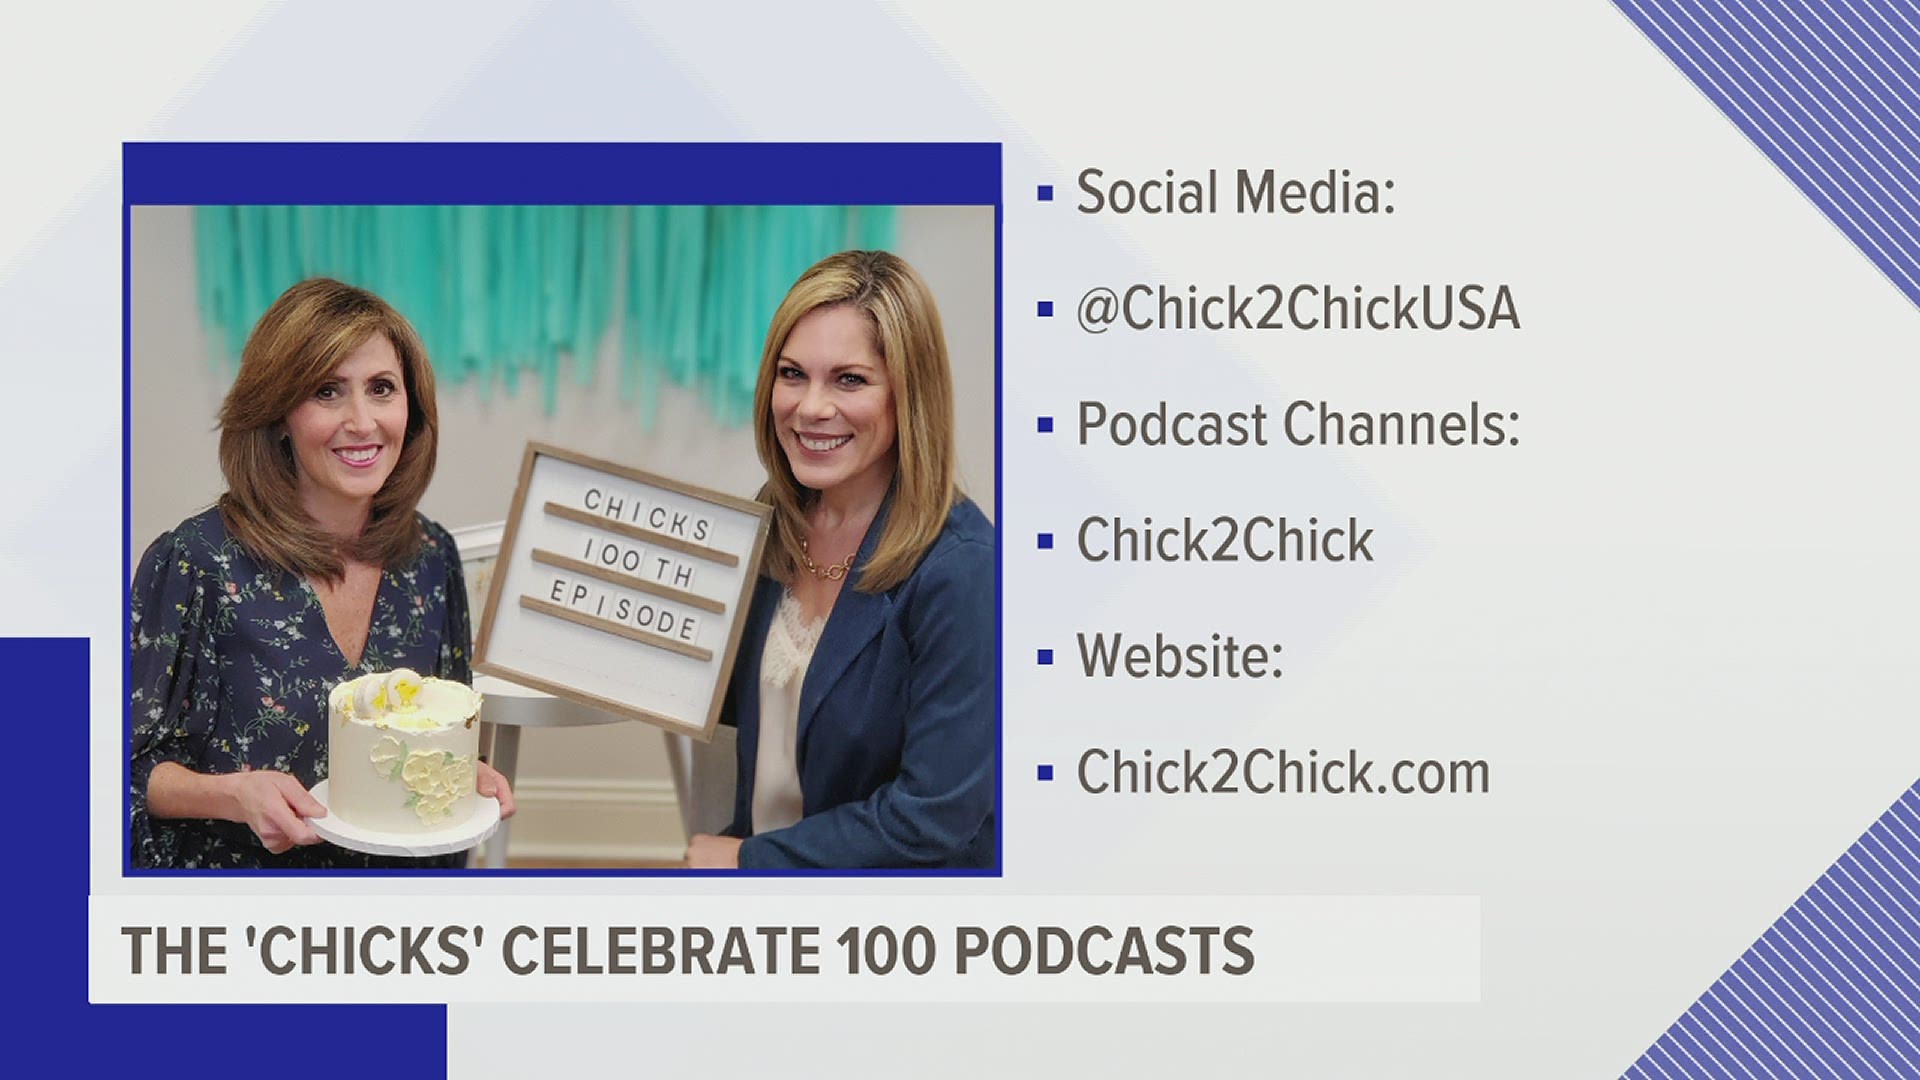 Flora Posteraro and Carrie Perry, the chicks from Chick2Chick, joined FOX43's Amy Lutz to talk about their podcast.